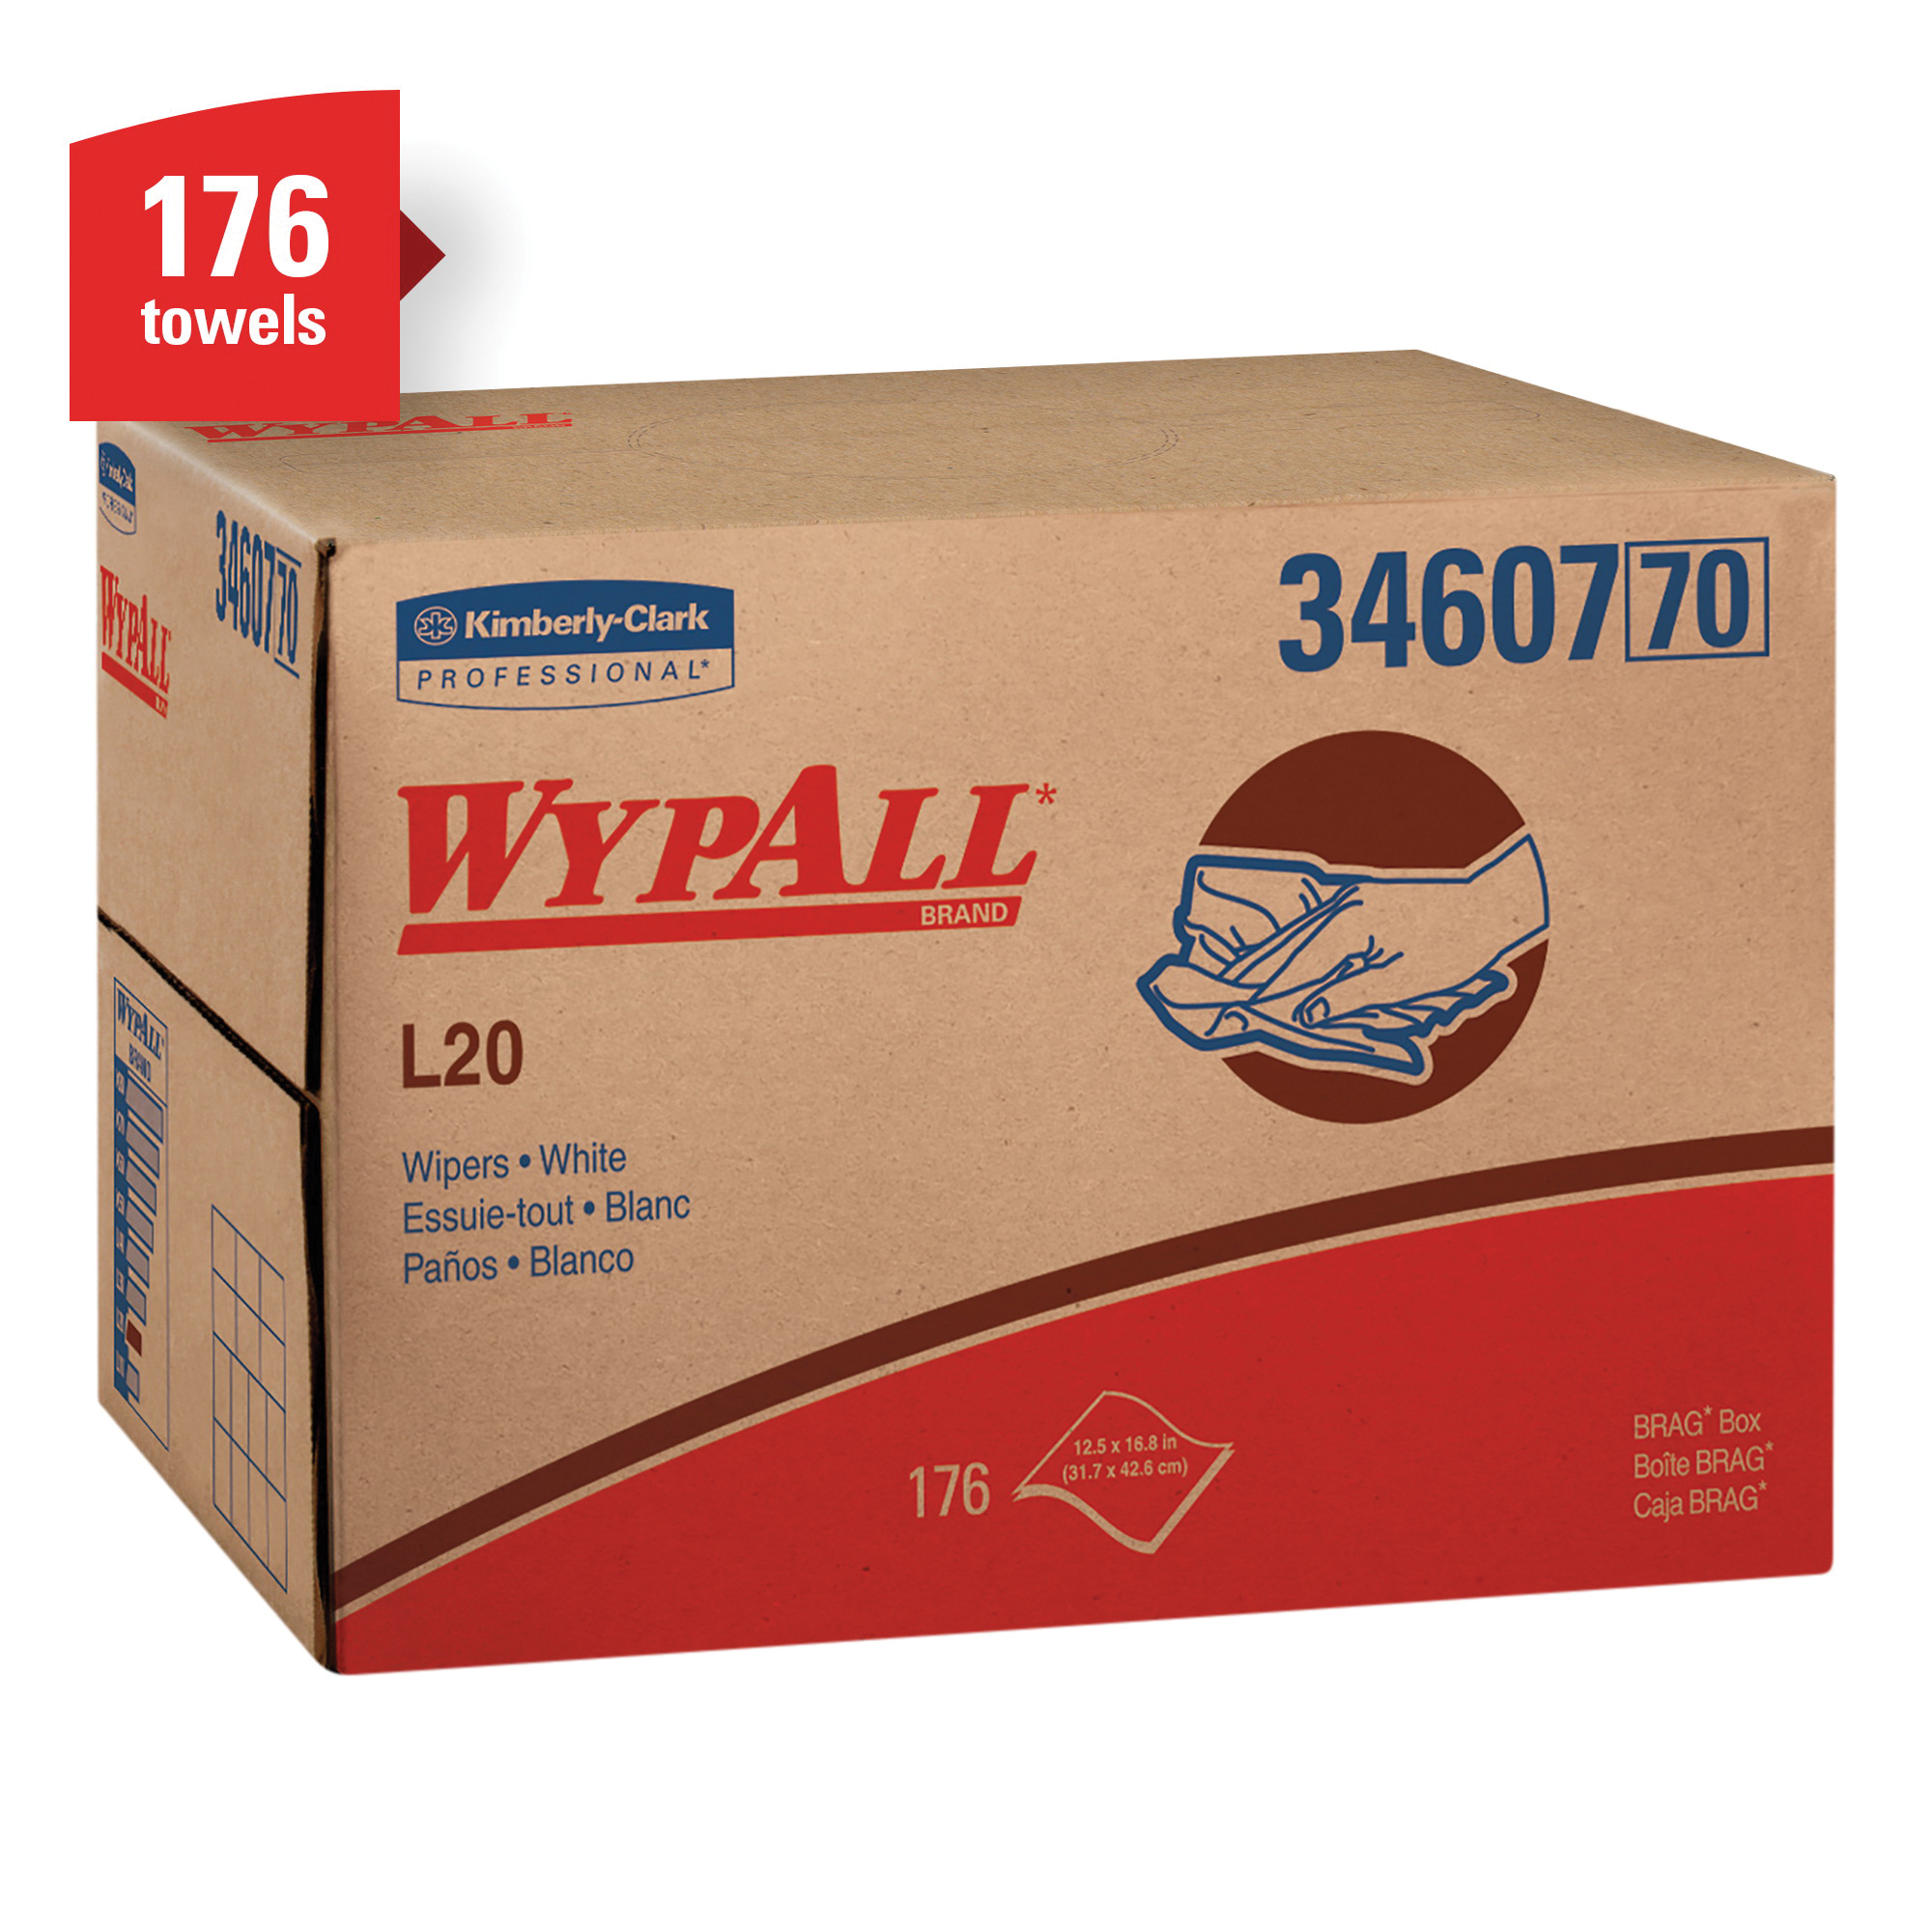 WypAll* 34607